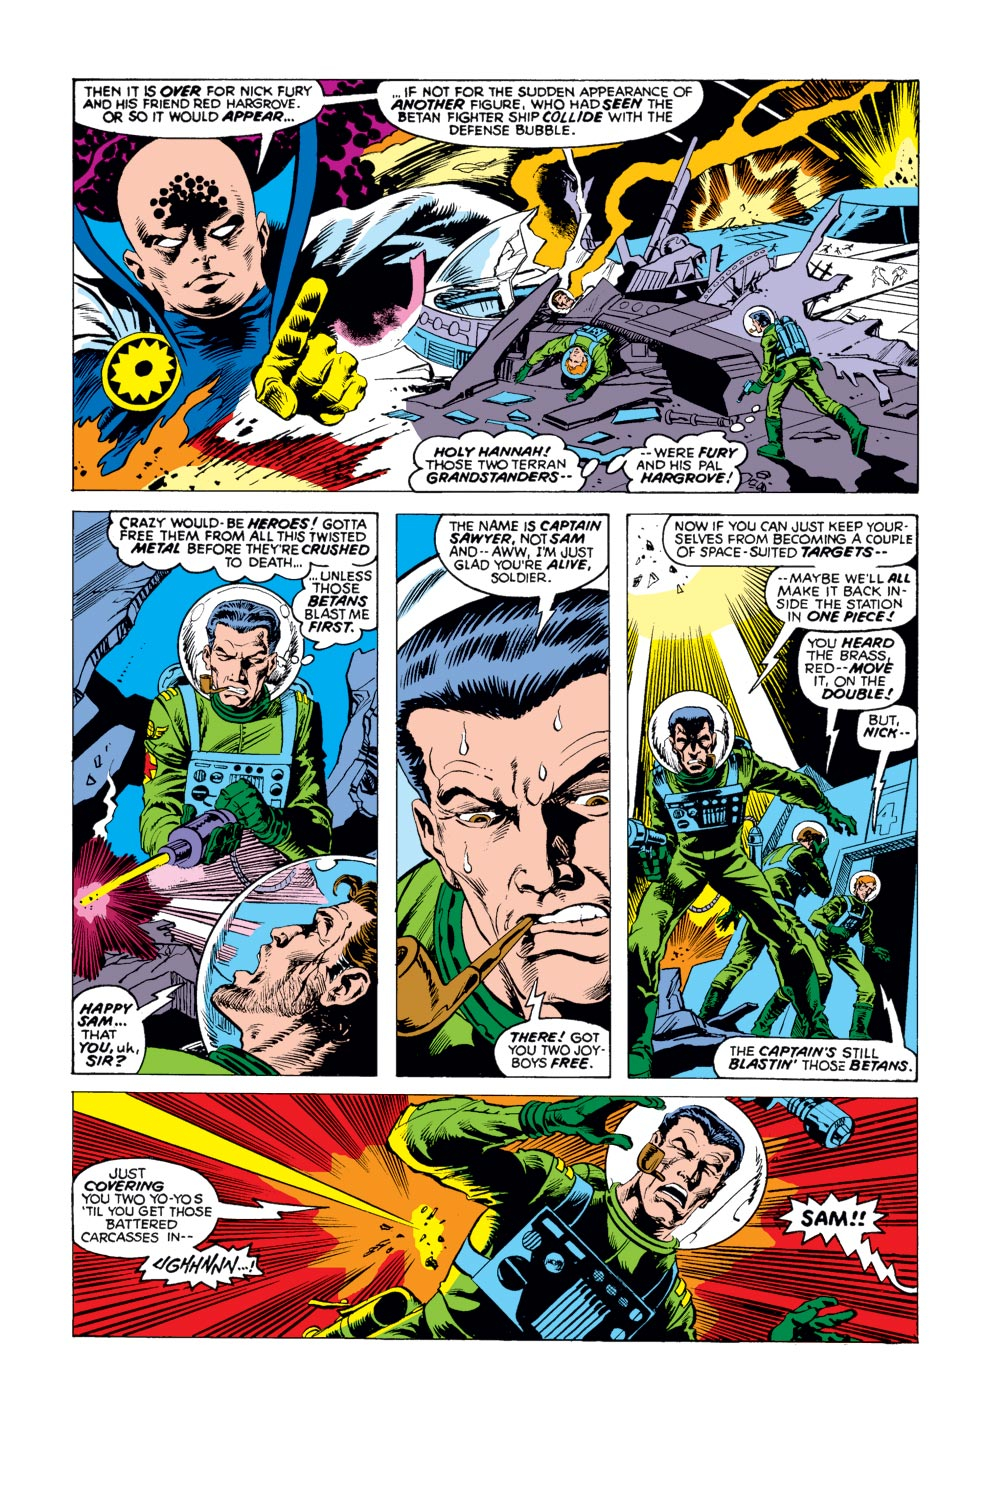 What If? (1977) issue 14 - Sgt. Fury had Fought WWII in Outer Space - Page 7